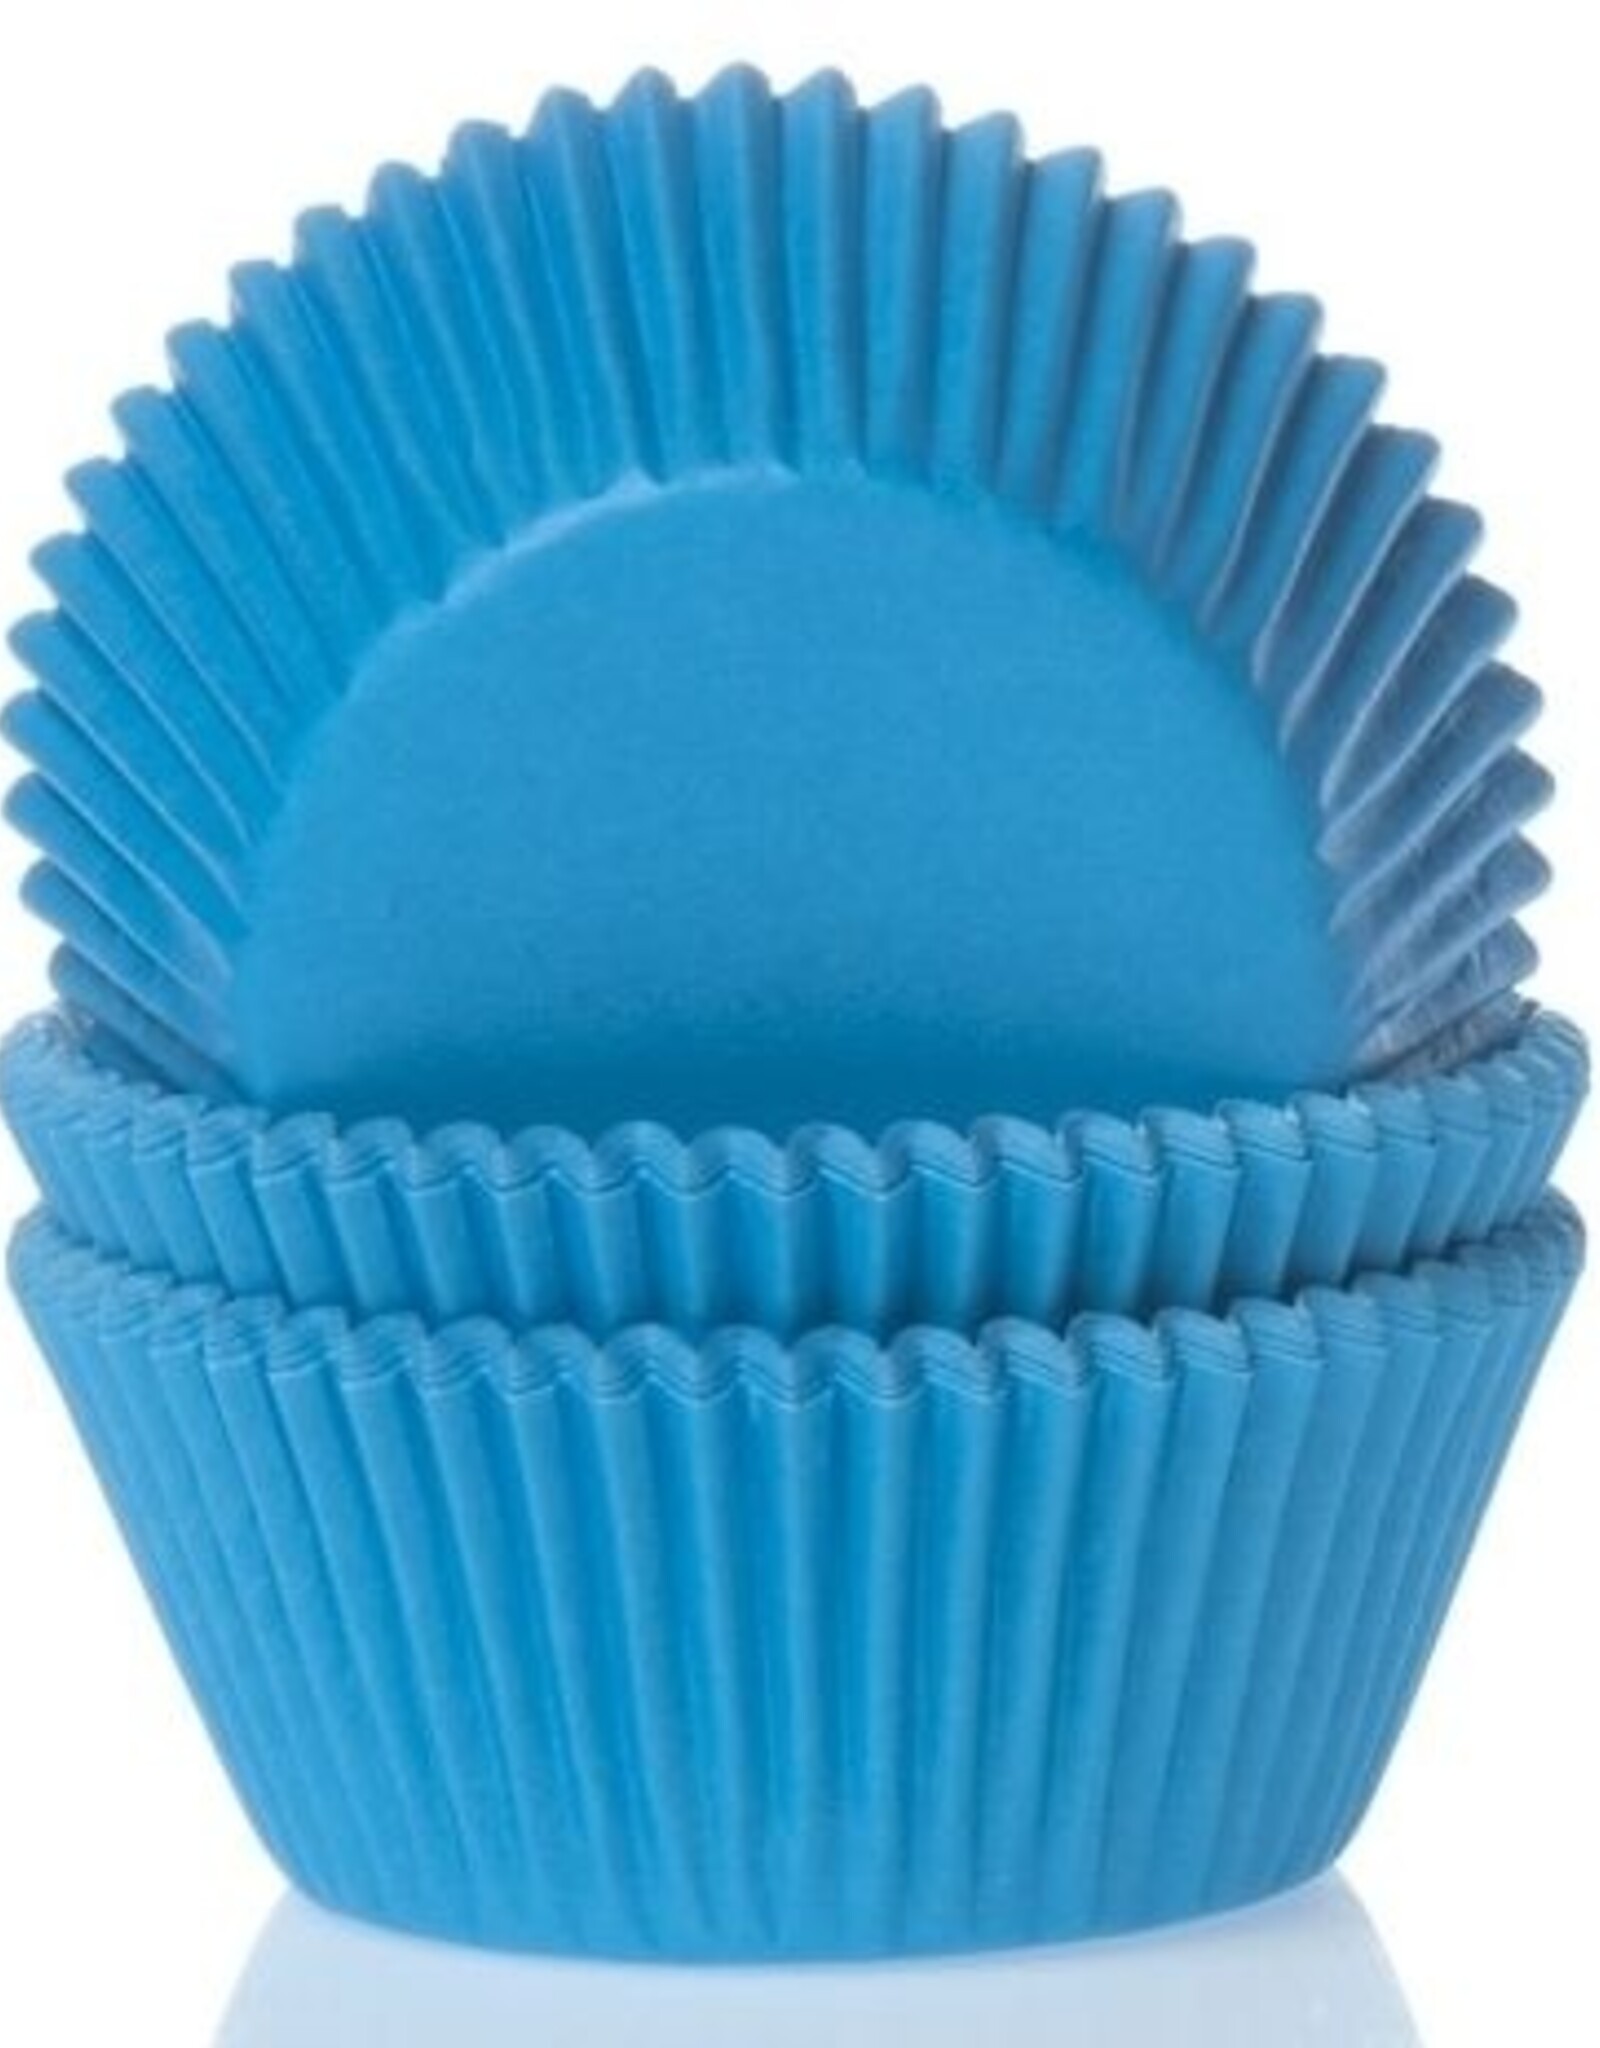 House of Marie House of Marie Baking Cups Cyaan Blauw - pk/500